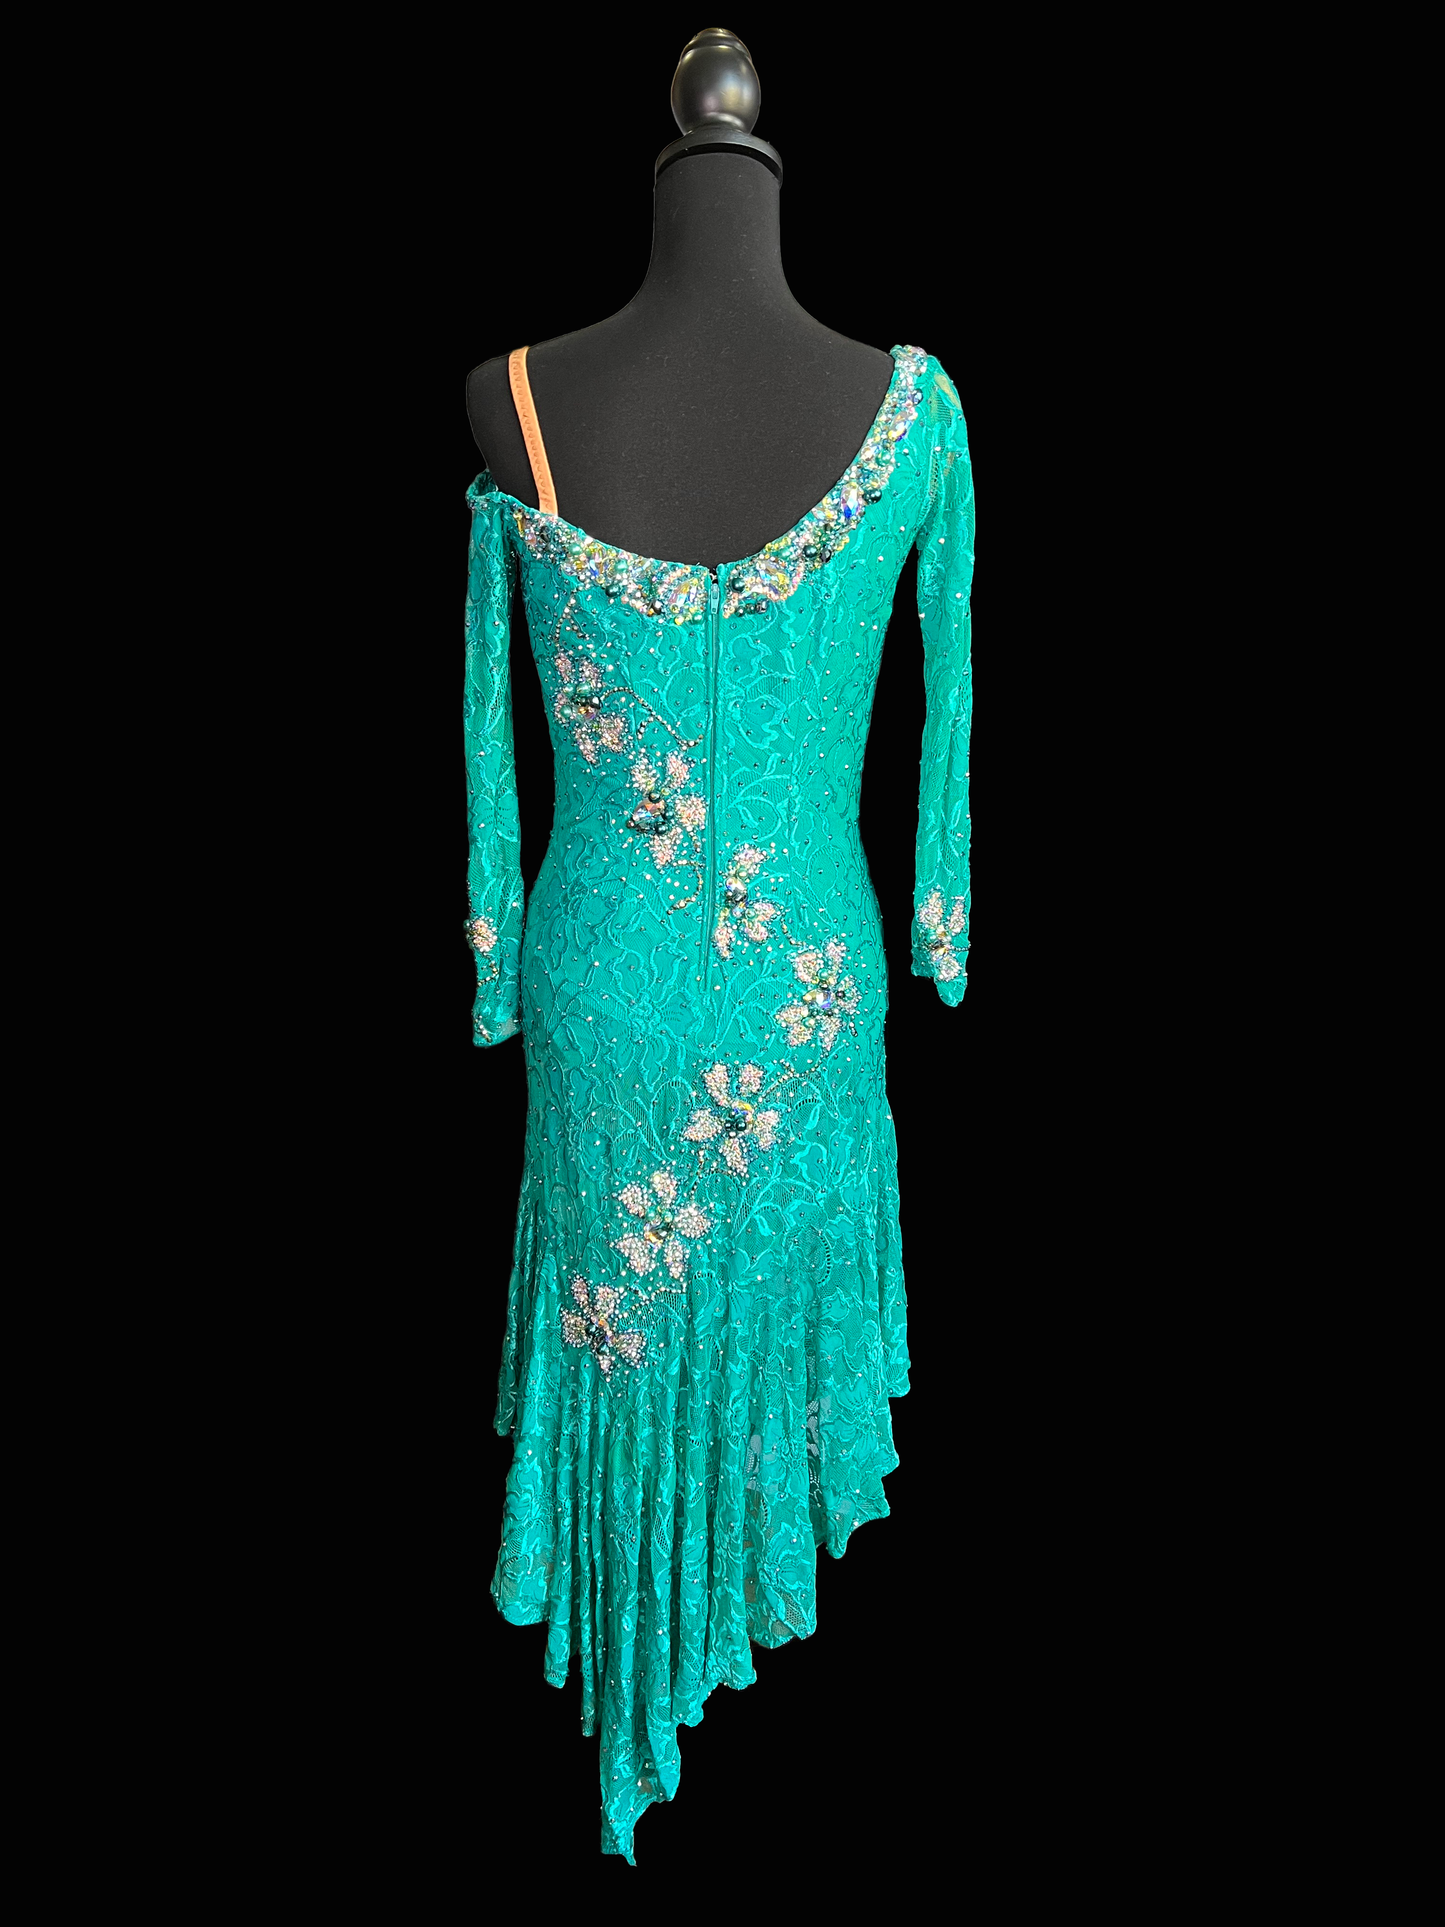 Resale Artistry in Motion Jade Lace Latin Dress with Asymmetrical Neckline and Long Sleeves Sz M Lat401